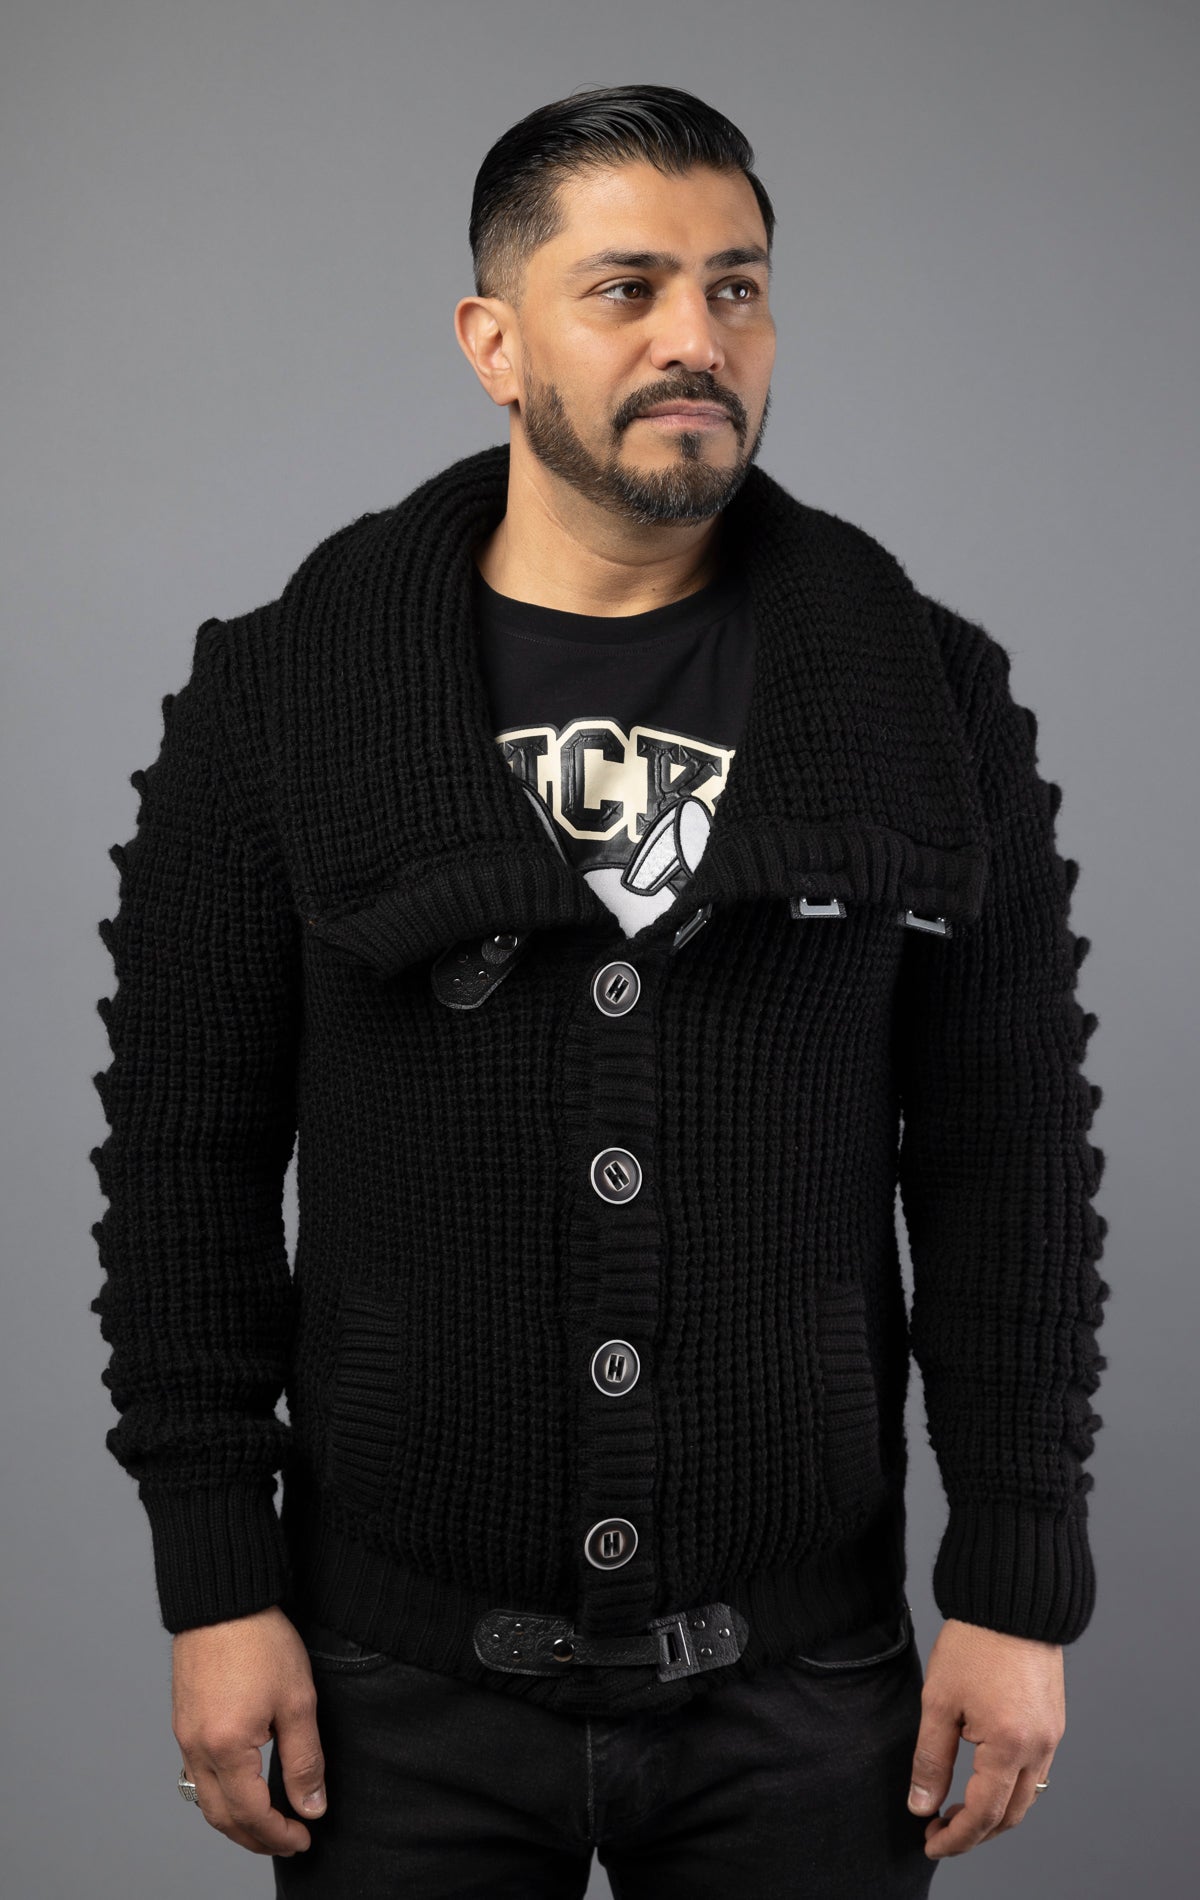 Model wearing black versatile, high-quality sweater designed with heavy weight material to be worn in multiple ways